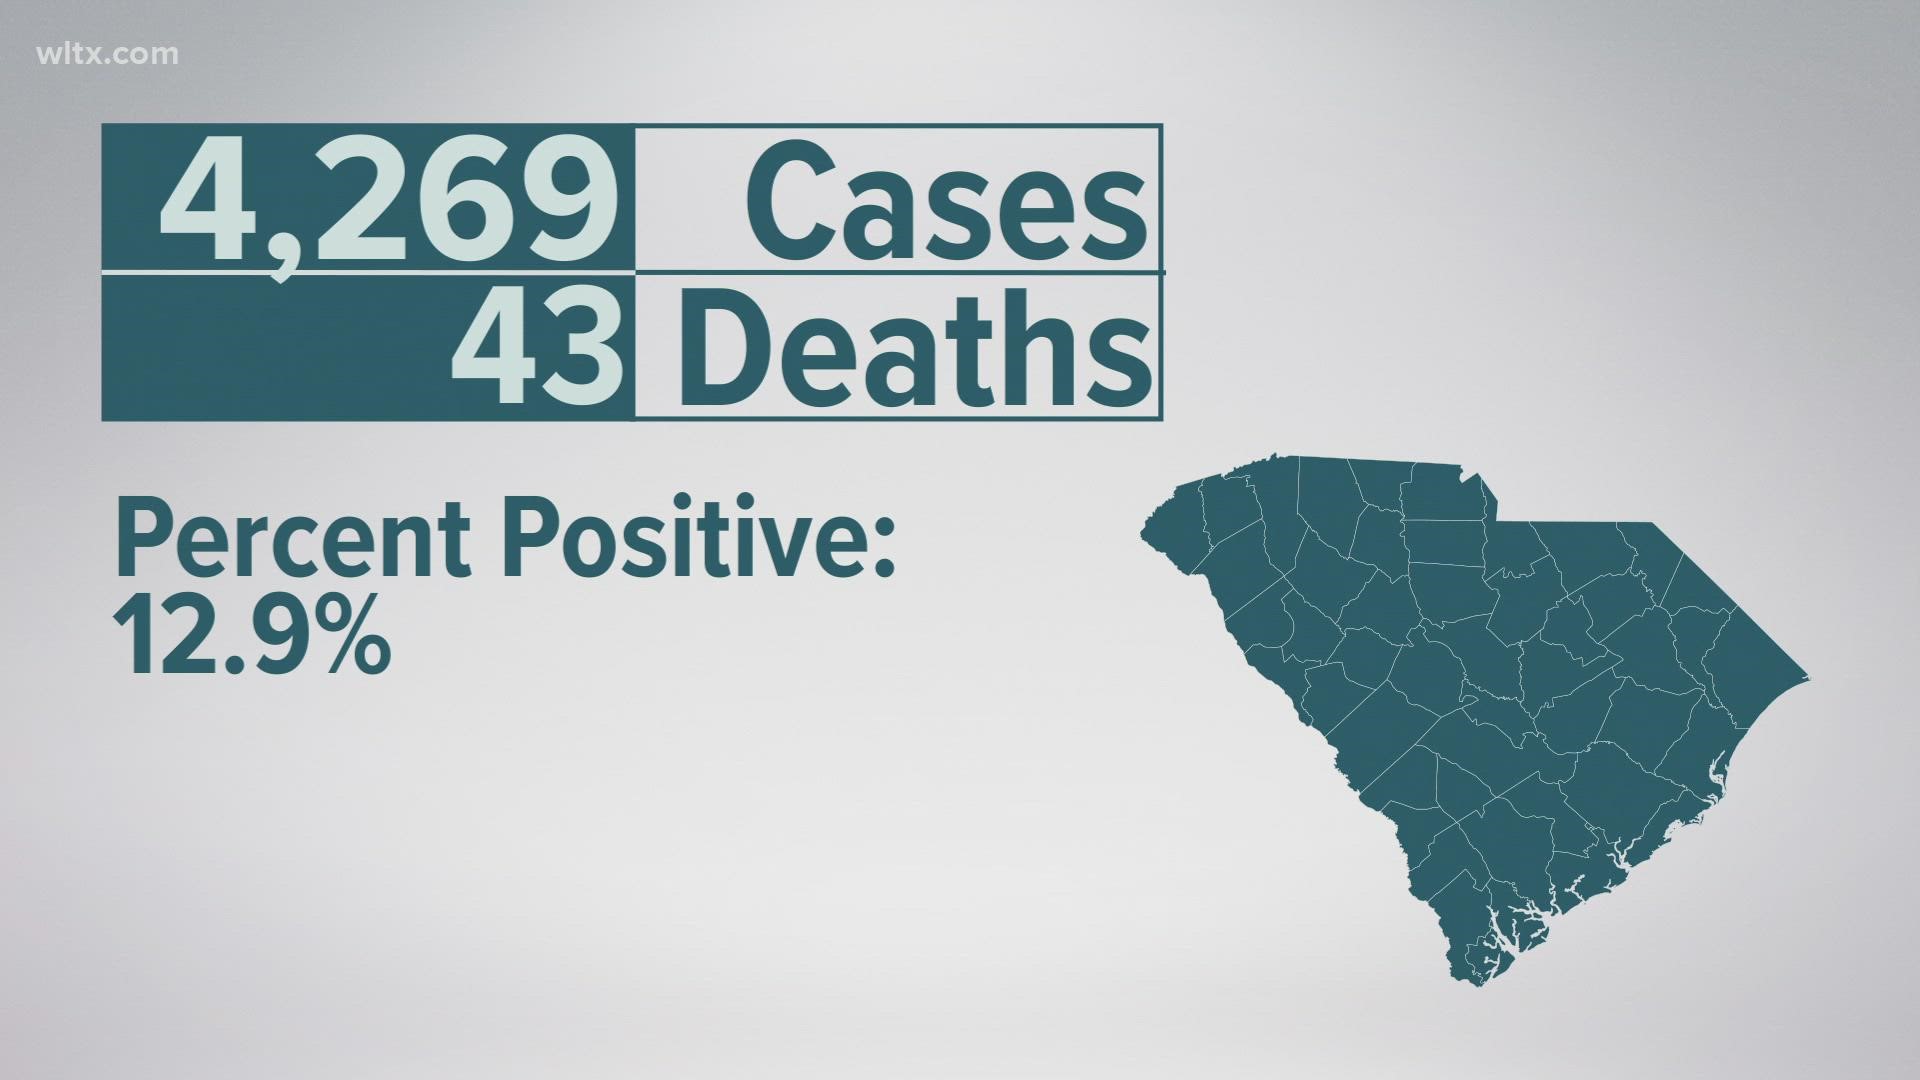 Over 4,000 cases and almost 50 deaths.